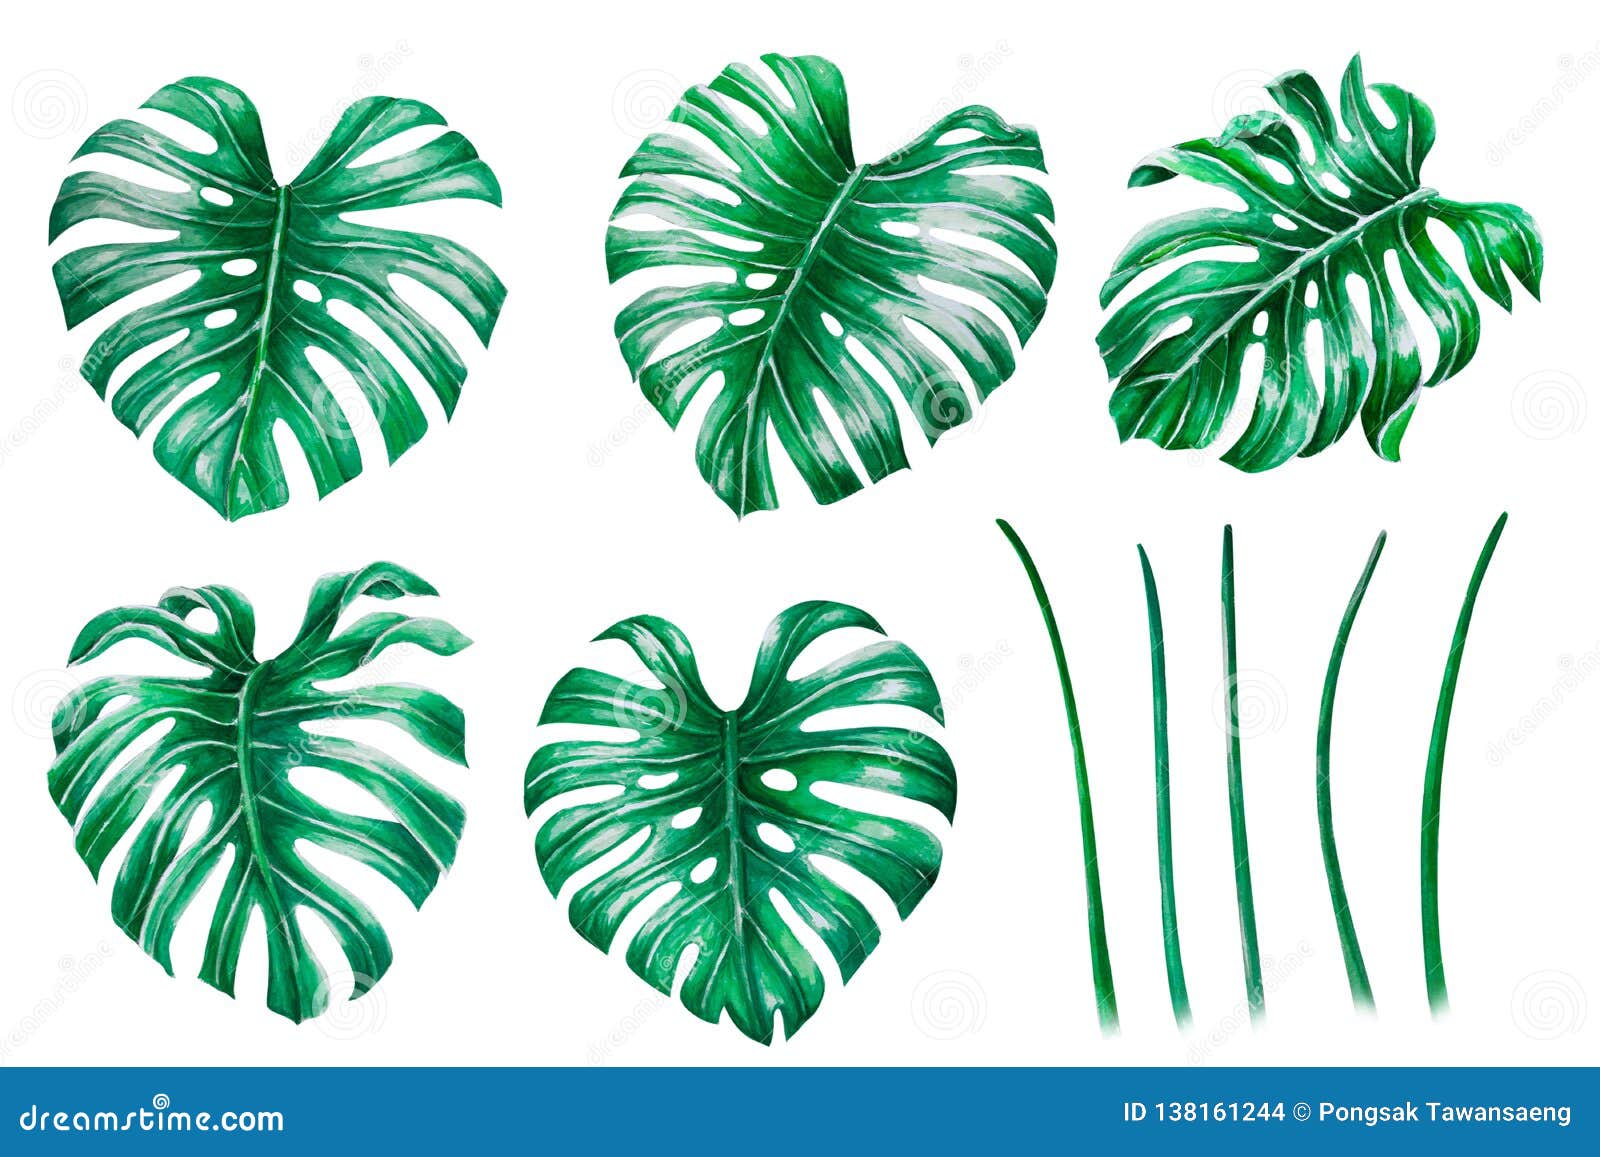 Set of Green Monstera Tropical Leaves Watercolor Illustration, Isolated ...